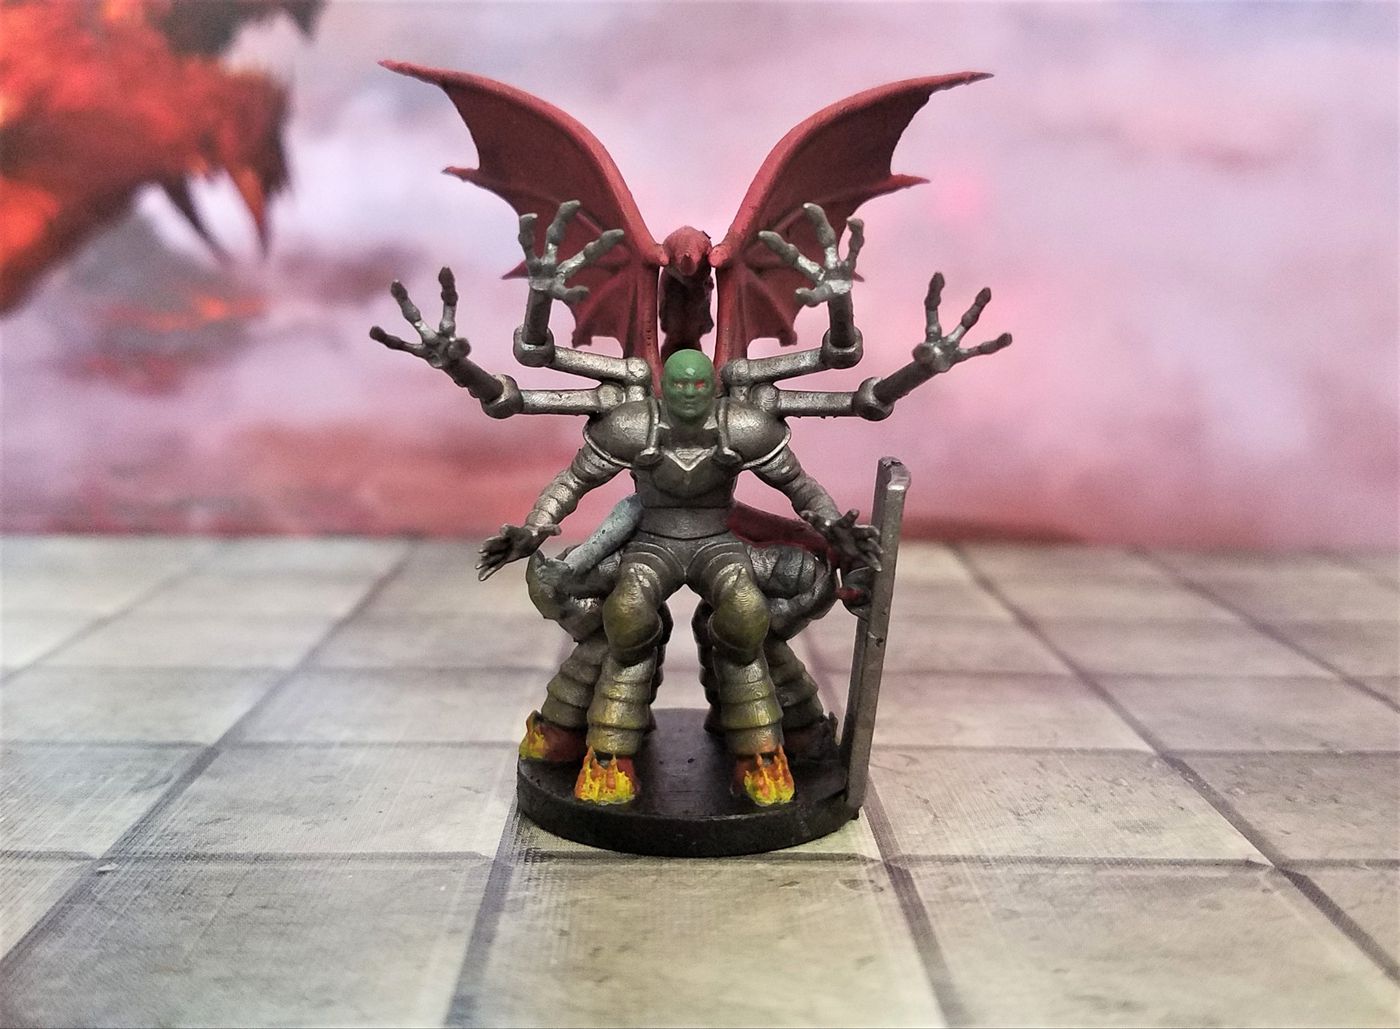 An artist 3D models of every D&D monster, and they're all free - Polygon